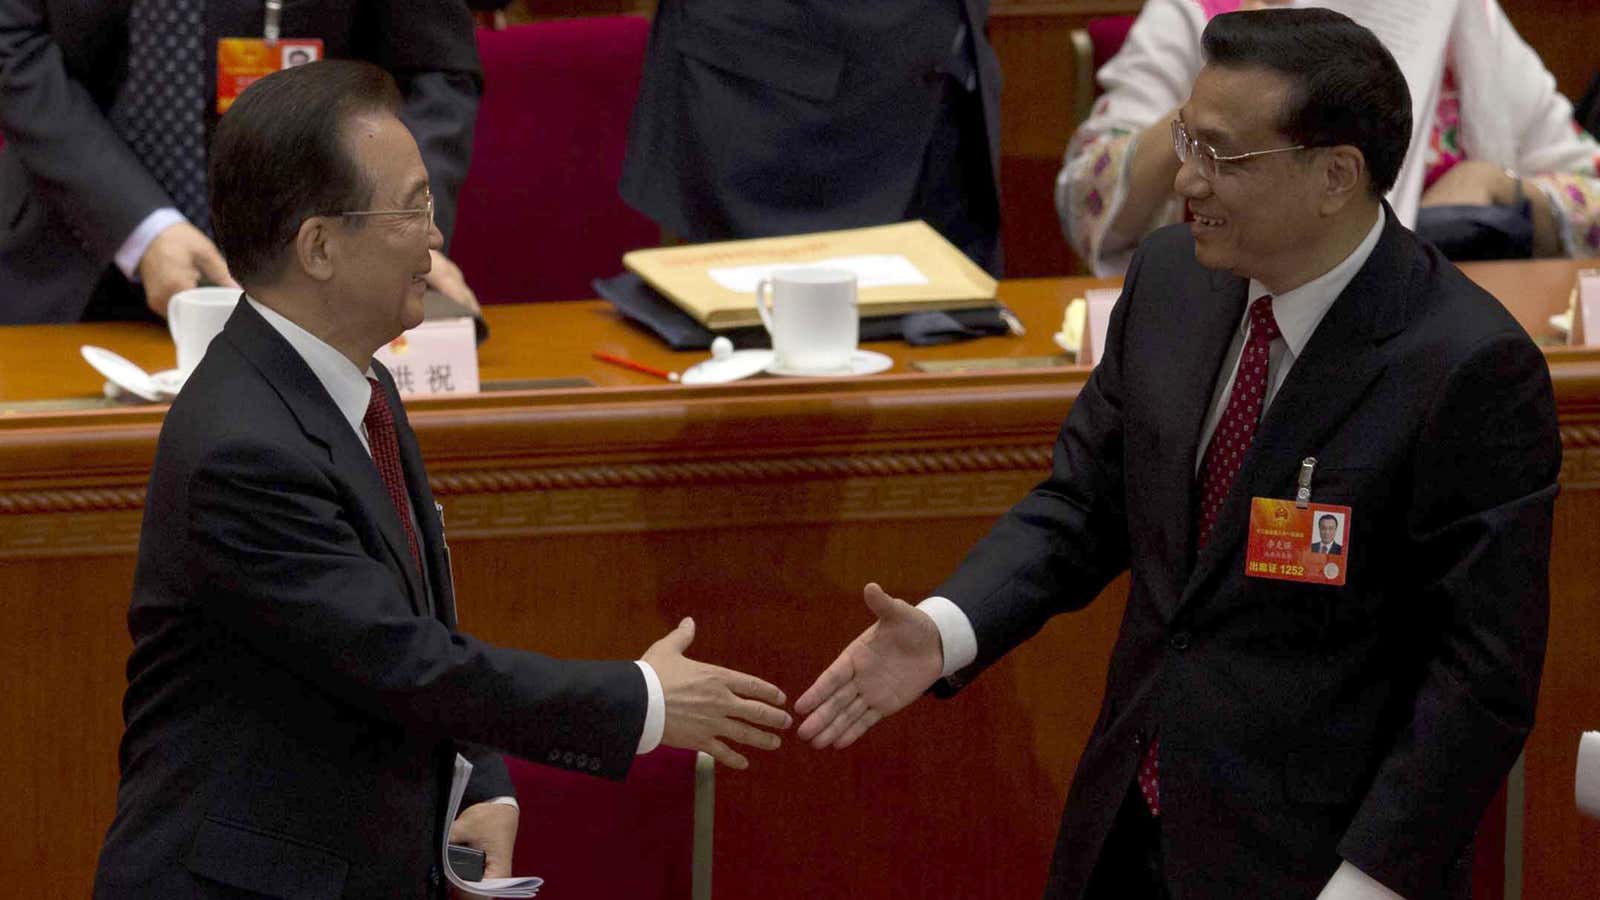 Wen Jiabao hands off China’s massive reform challenges to incoming premier, Li Keqiang.